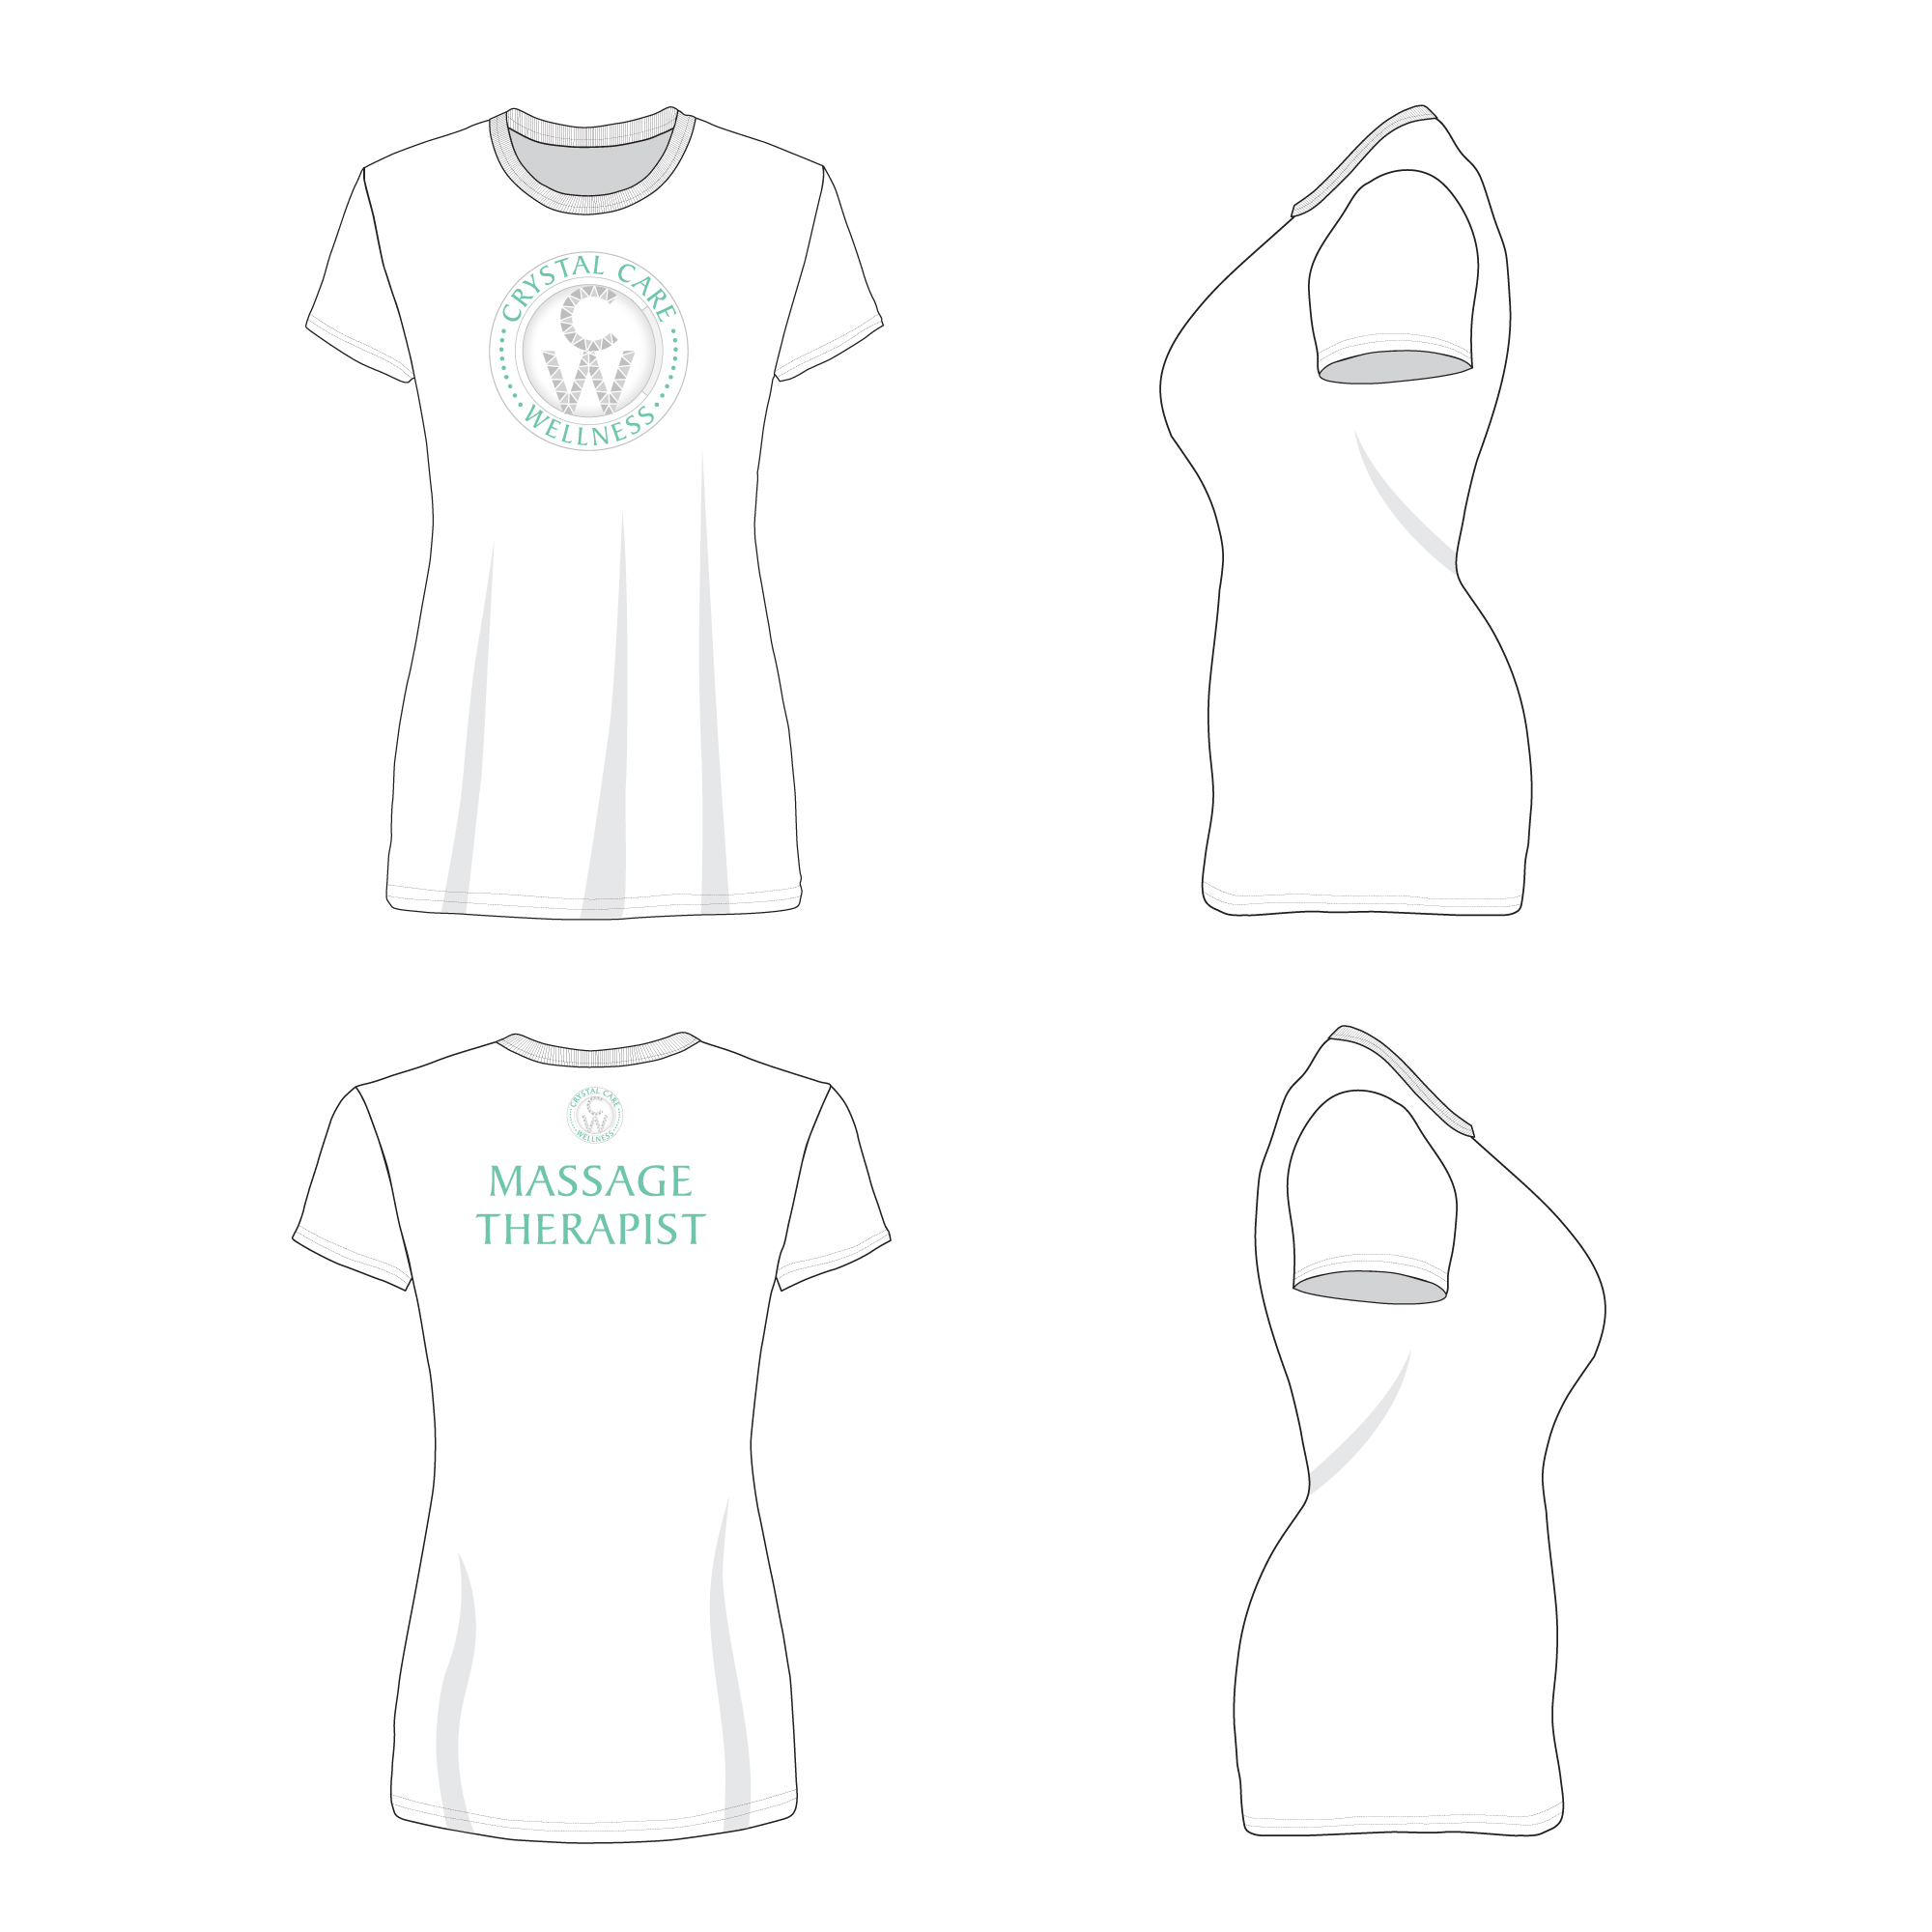 Crystal Care Wellness - Adult T-Shirts